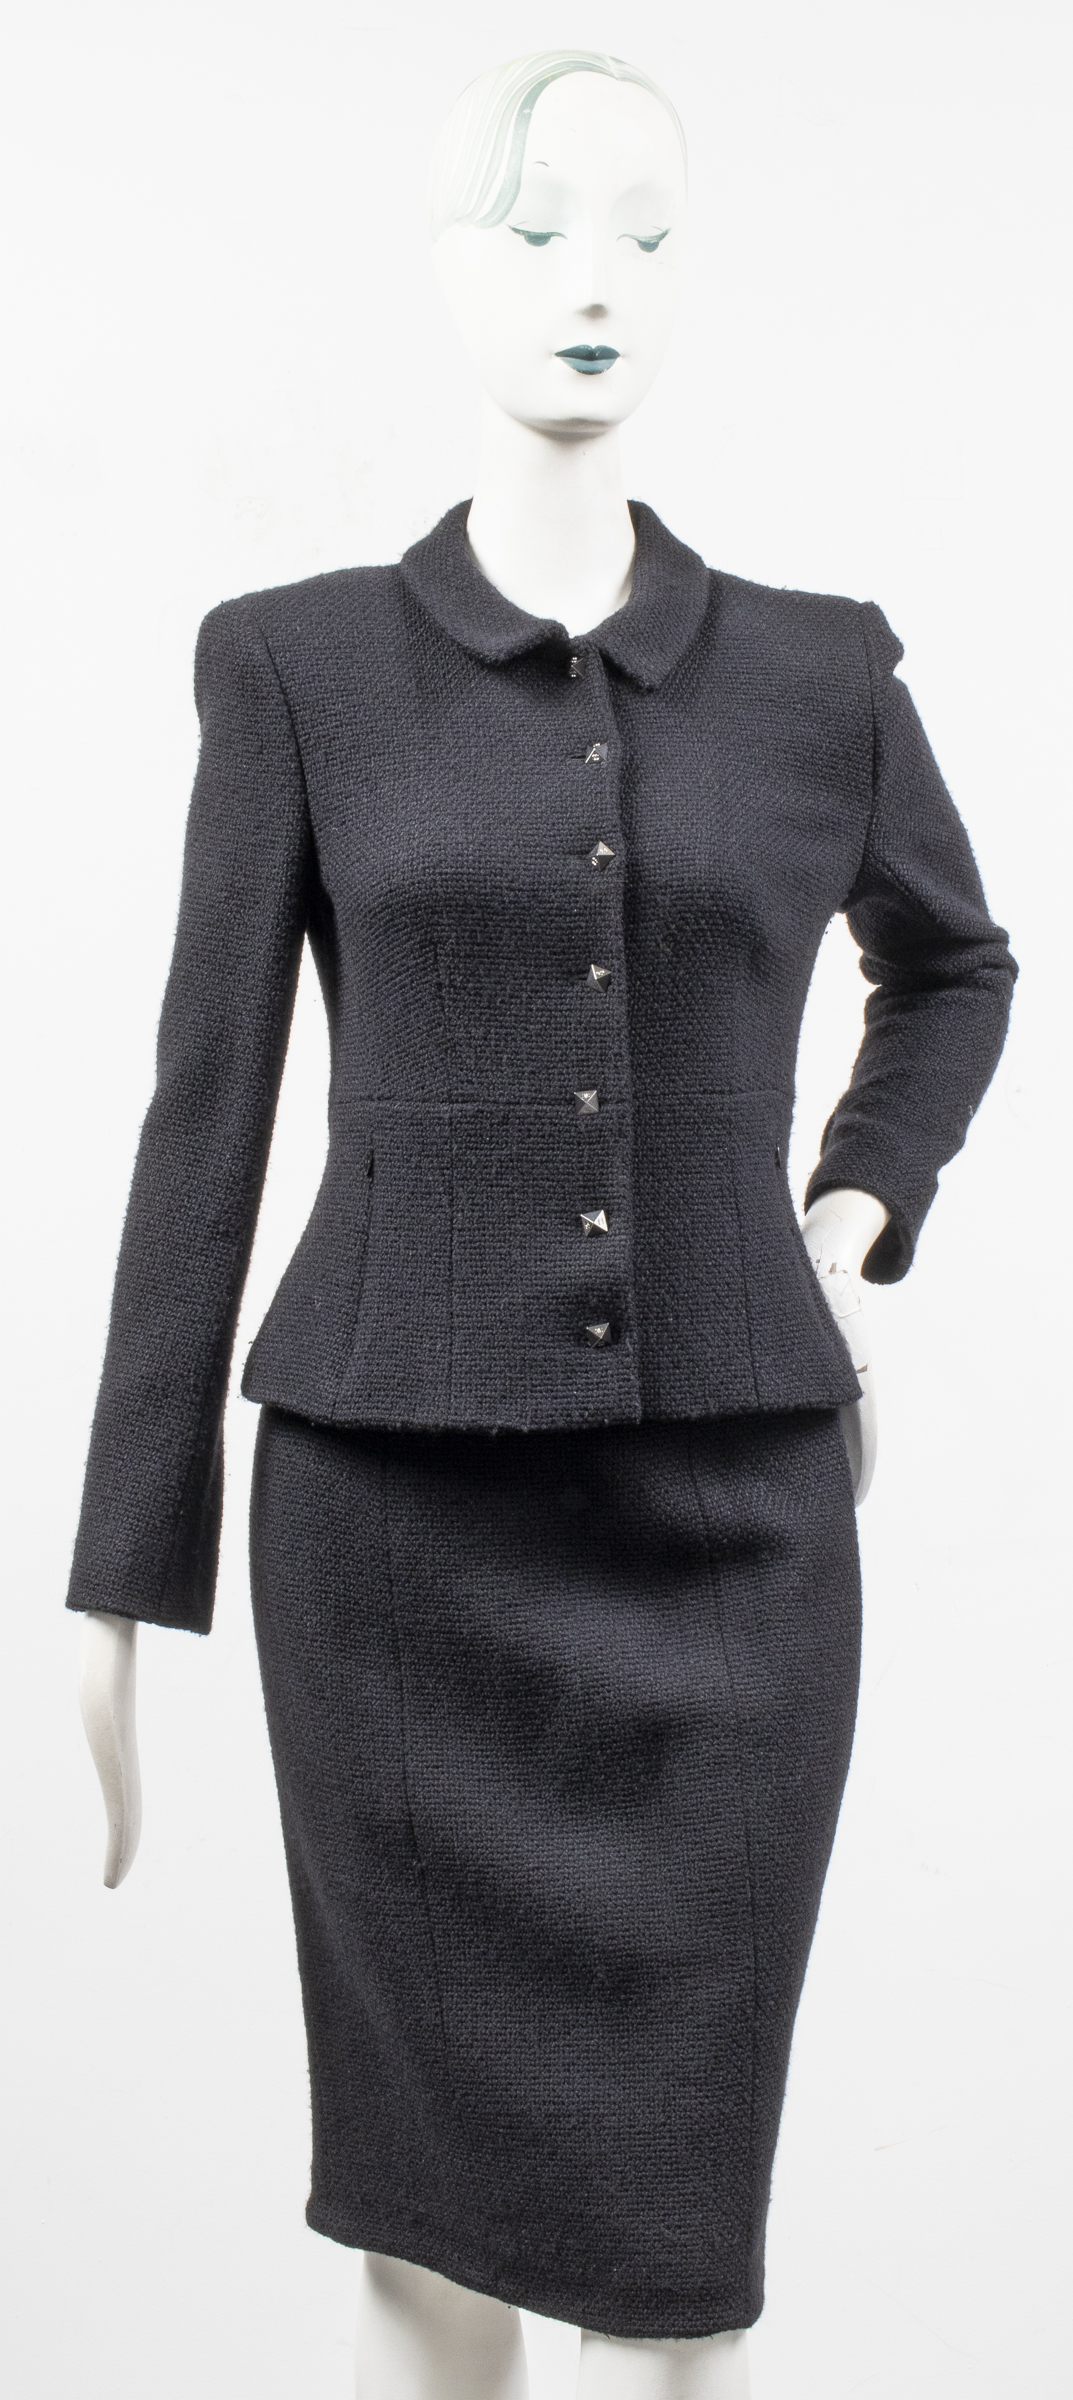 CHANEL BLACK WOOL SKIRT SUIT Chanel